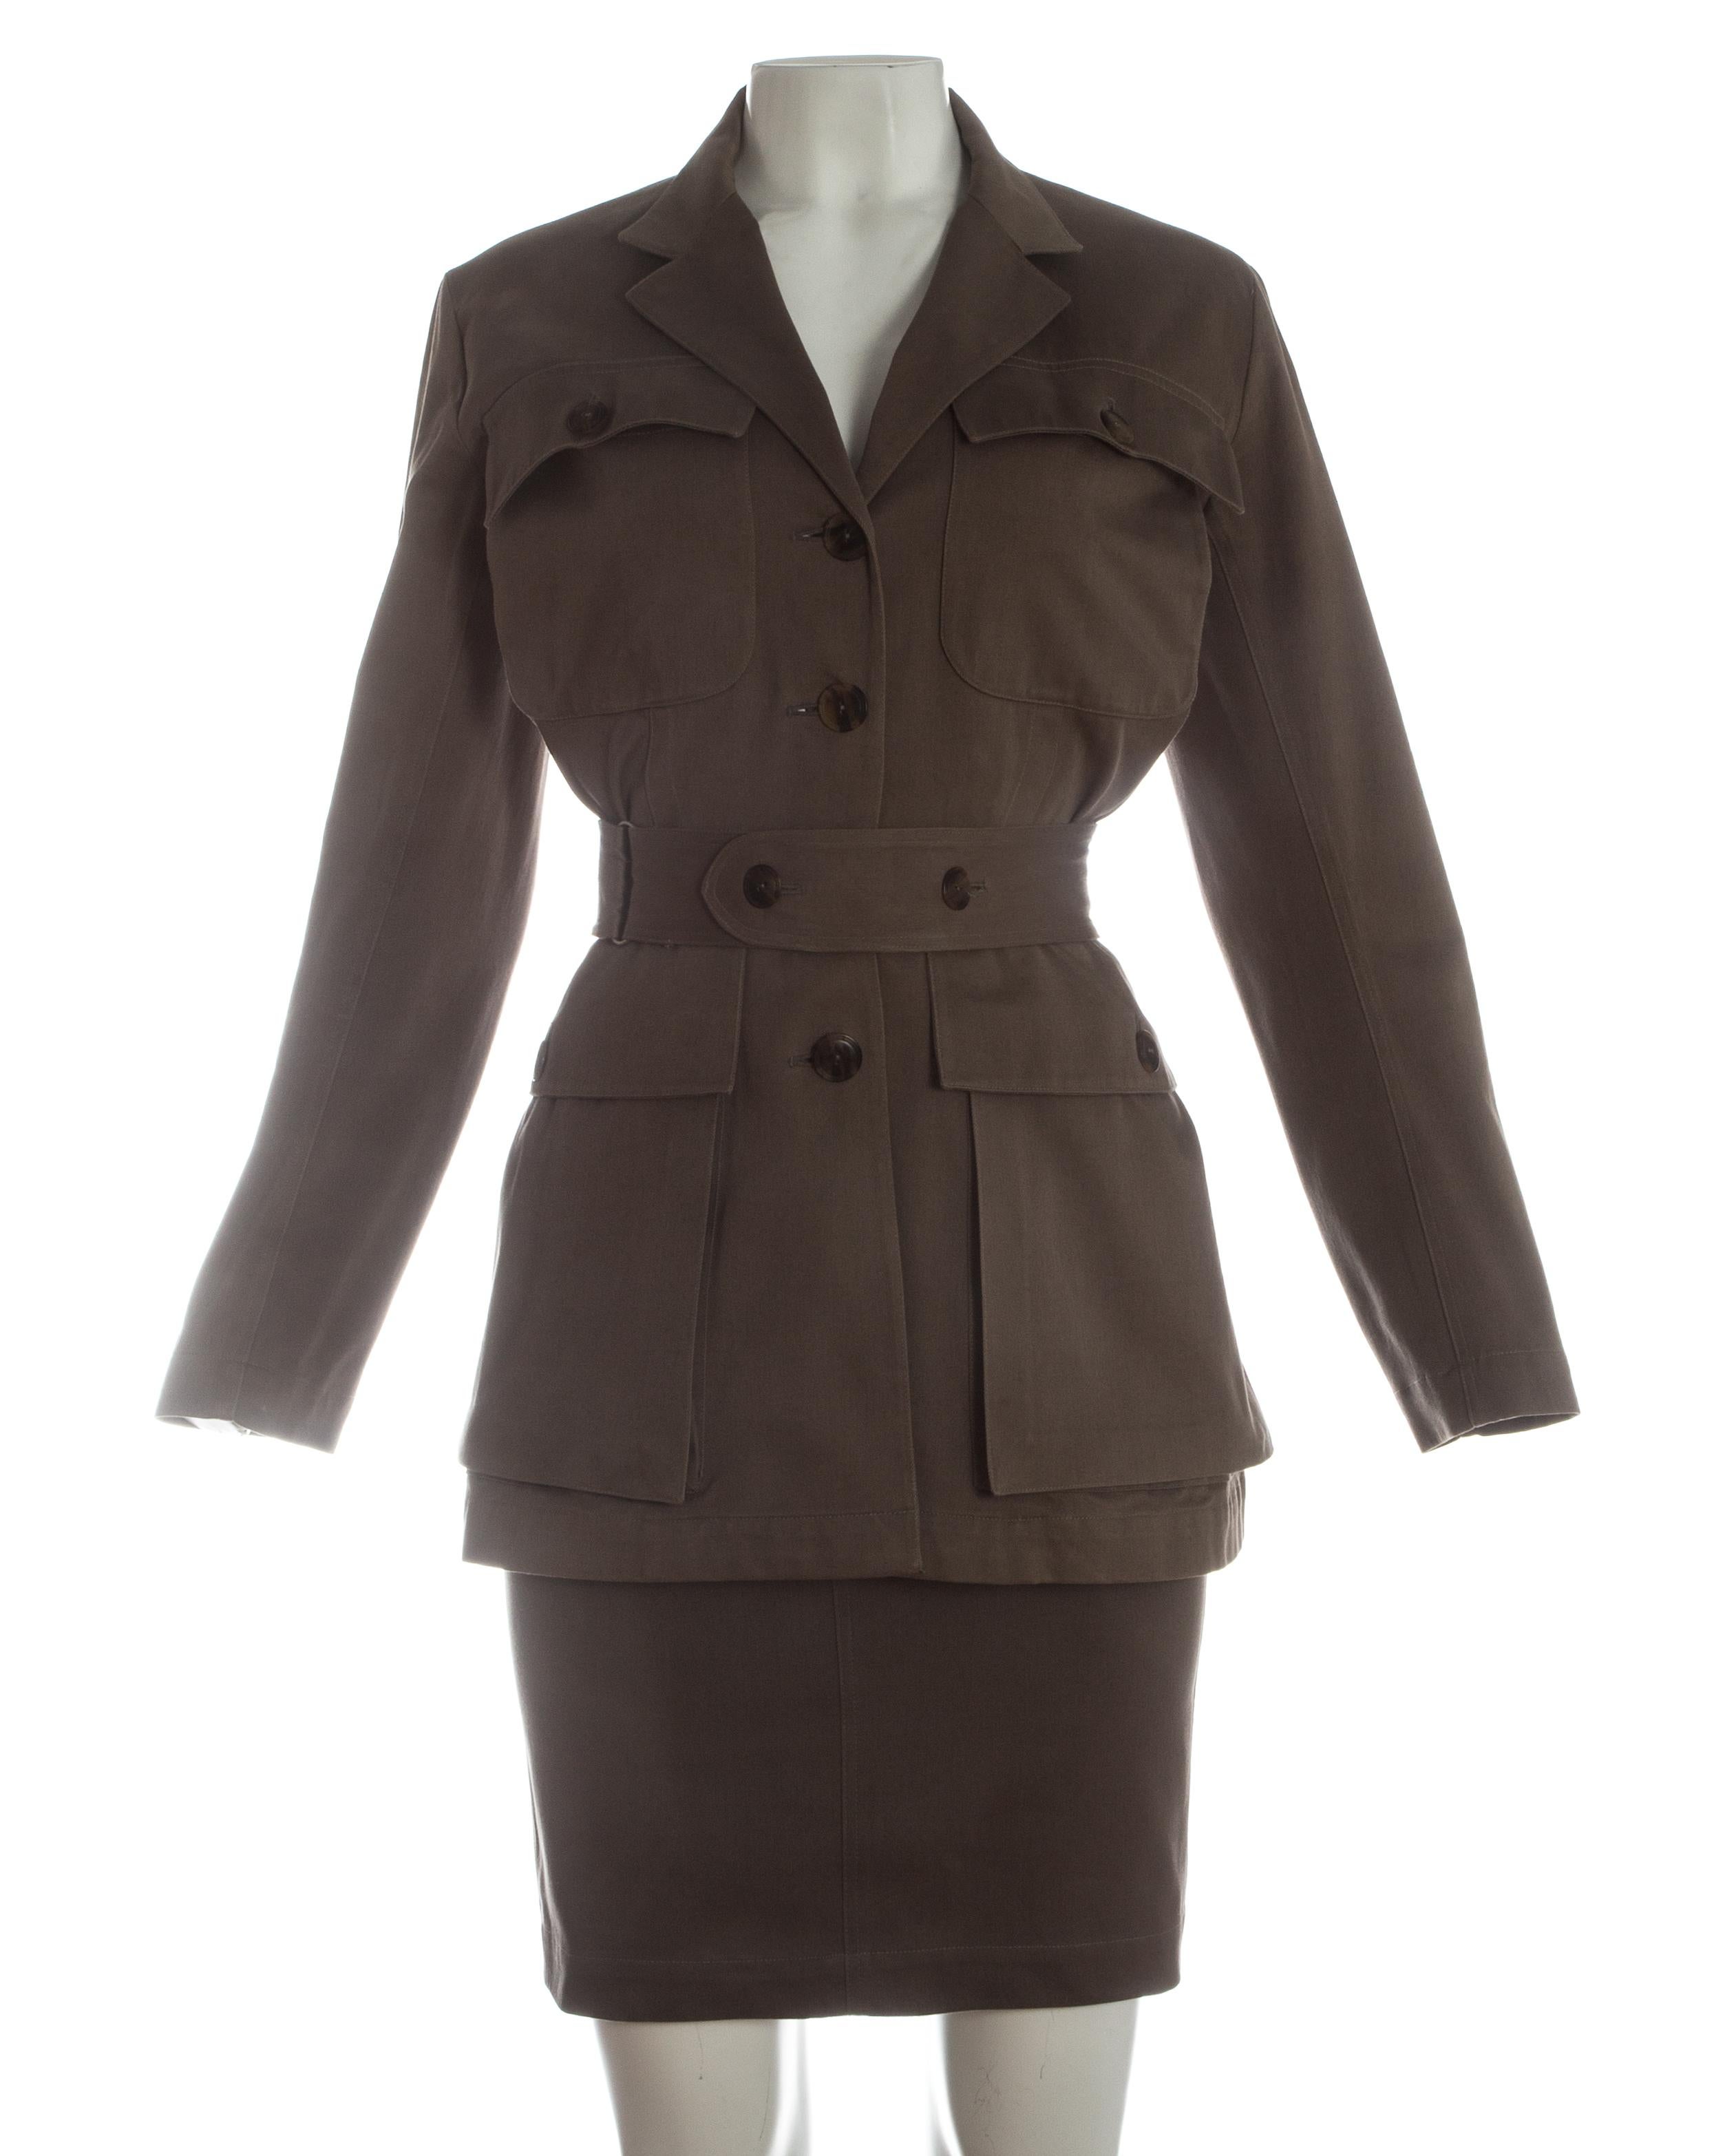 - Safari jacket with notched lapels,  four large flap pockets, four button closure, matching adjustable belt
- High waisted fitted pencil skirt finishing just above the knee 

Spring-Summer 1990
